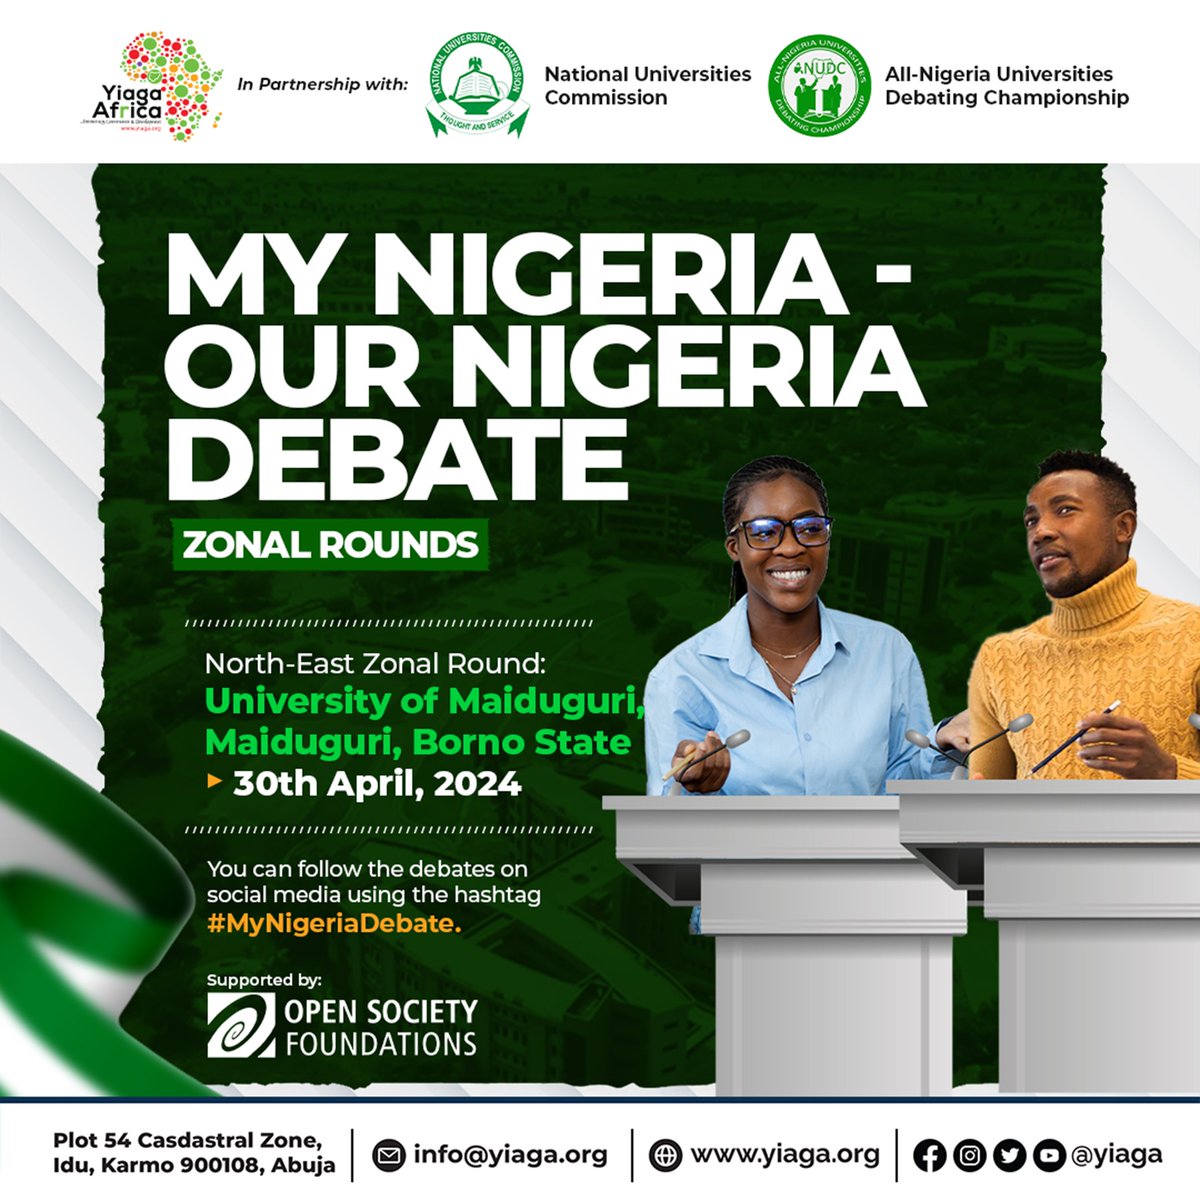 Today, the last zonal round of the #MyNigeriaDebate takes place in Maiduguri, Borno State with four schools from the North-East participating: the University of Maiduguri; Abubakar Tafawa Balewa University, Bauchi; Yobe State University and the Gombe State University.